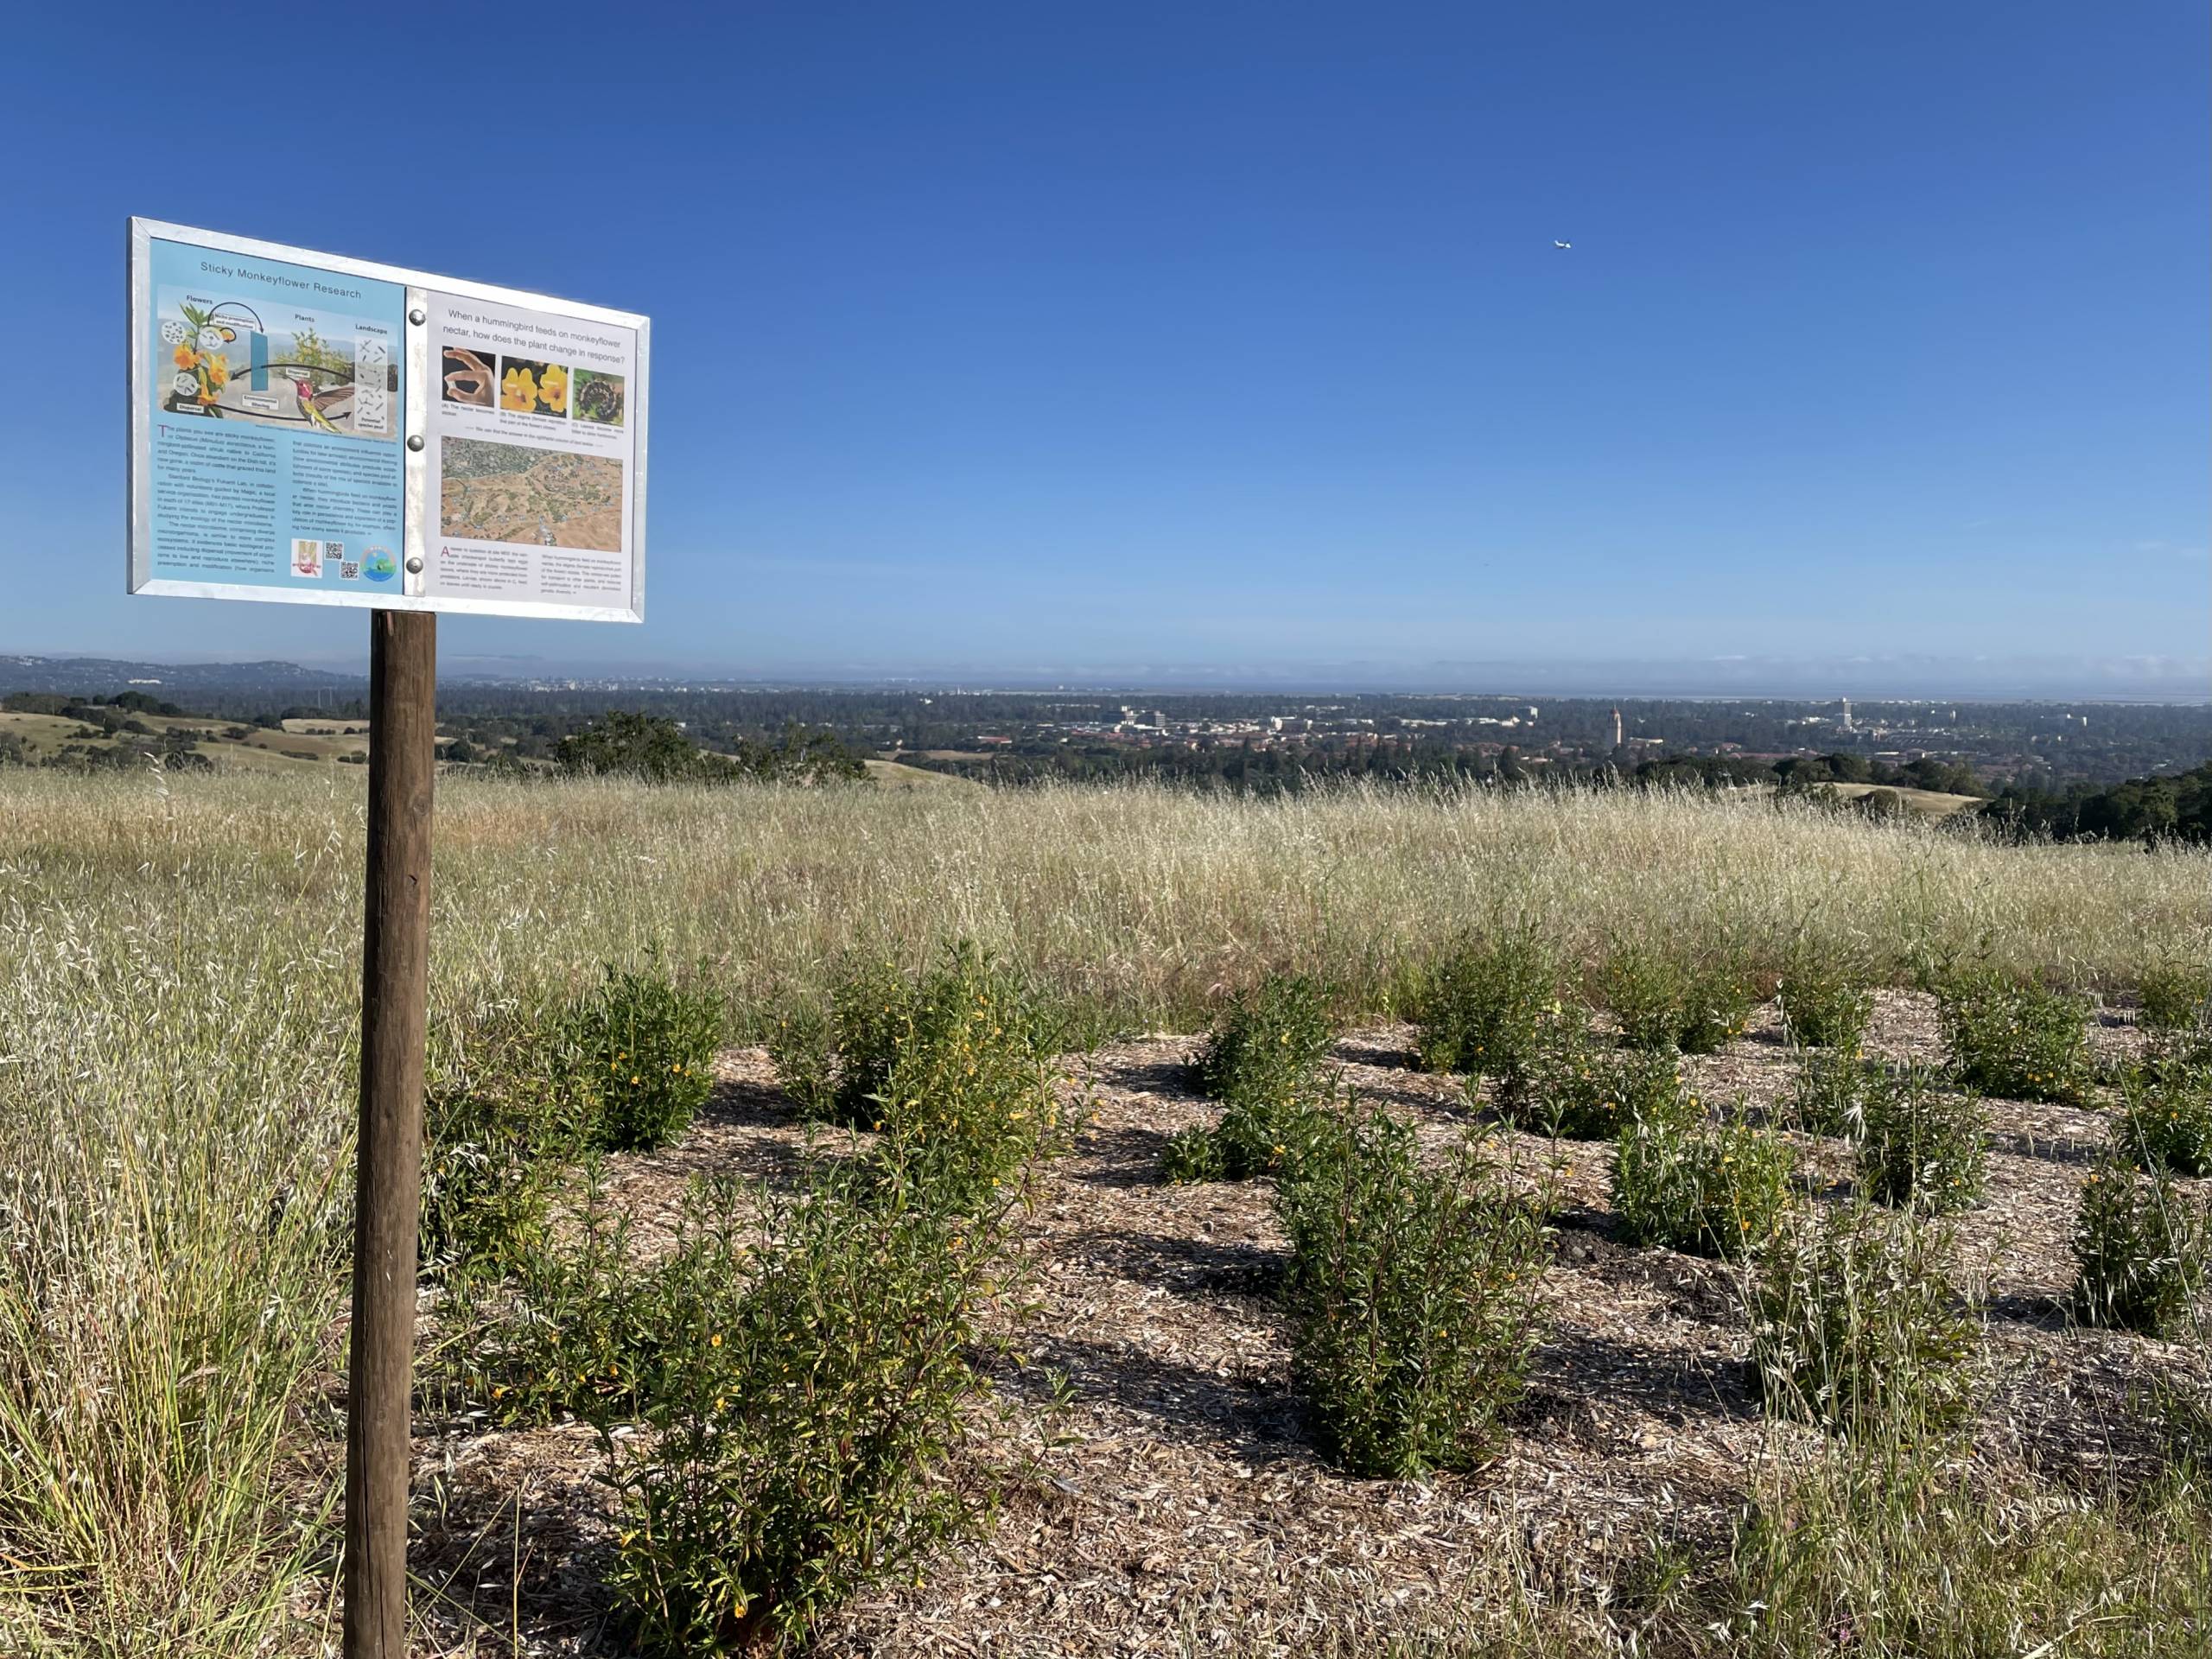 A sign is posted next to neat rows of flowers planted where grass has been cleared.